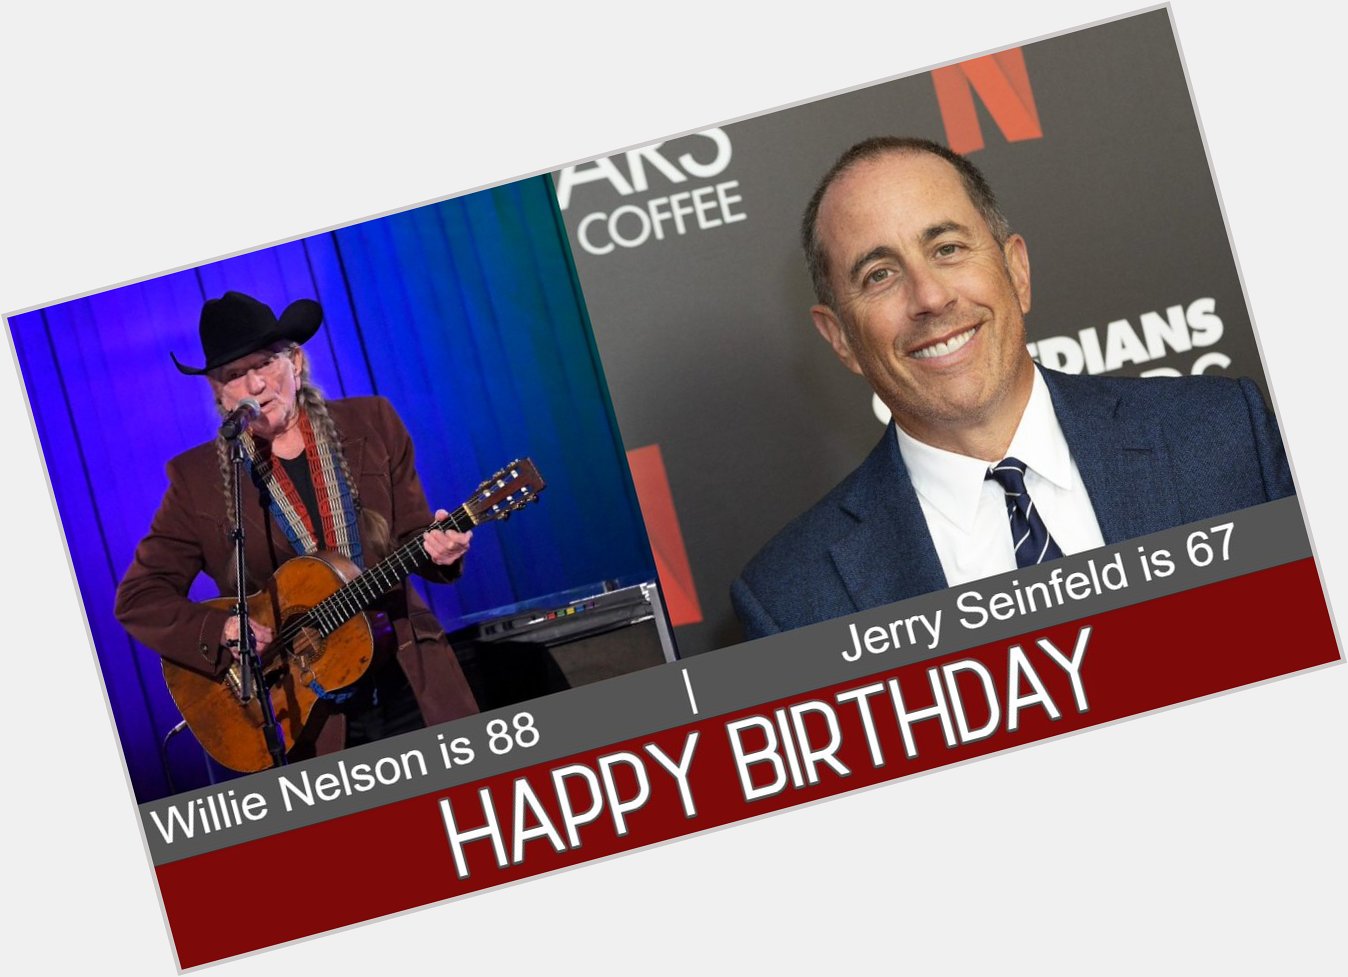 HAPPY BIRTHDAY: County music legend Willie Nelson is 88 today and Jerry Seinfeld is 67 today. 